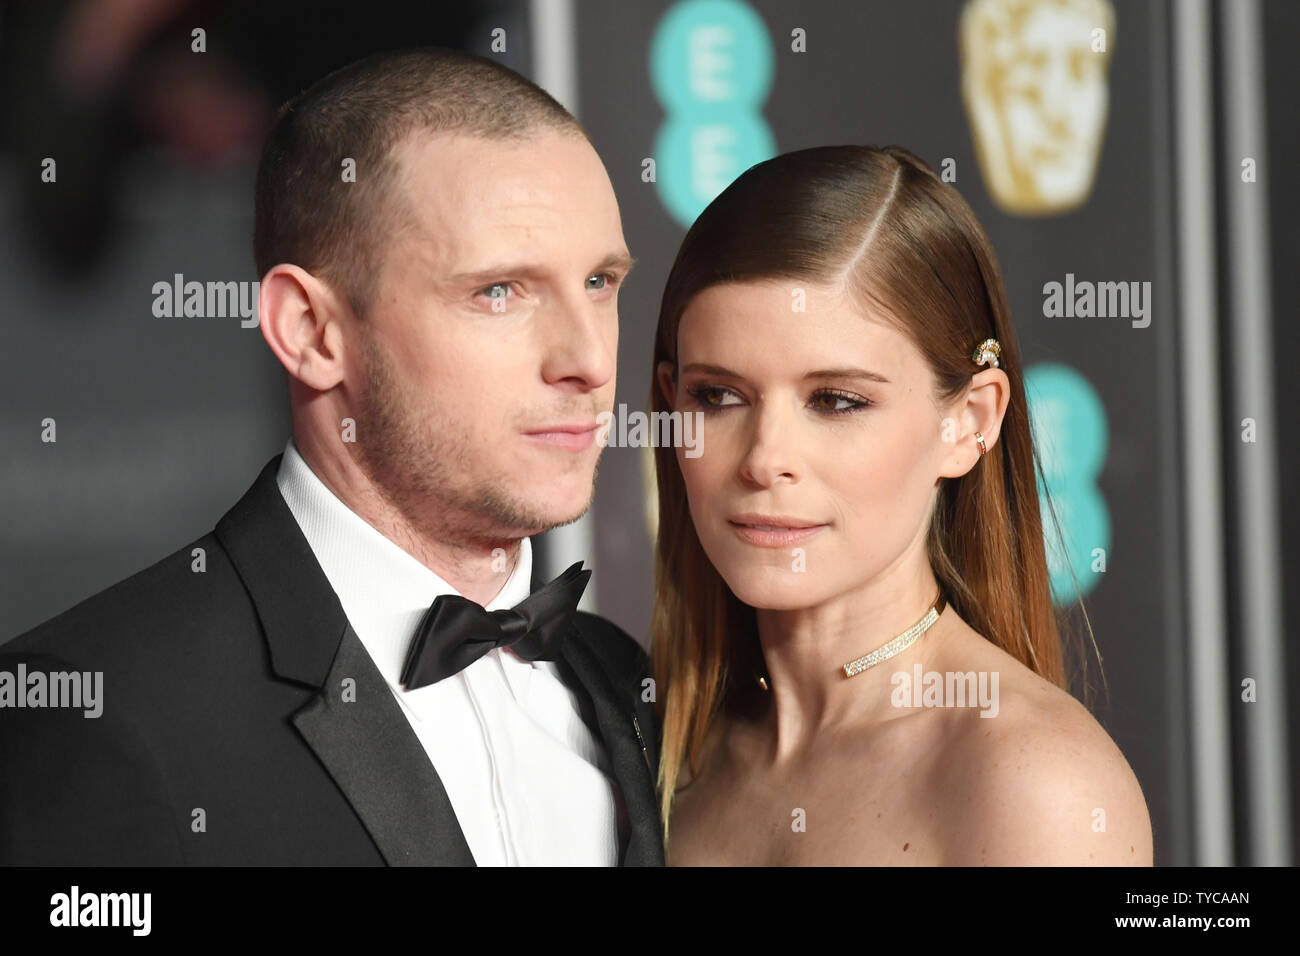 English actor Jamie Bell and American actress Kate Mara attend The British Academy Film Awards (BAFTA) at the Royal Albert Hall in London on February 18, 2018. Photo by Paul Treadway/ UPI Stock Photo